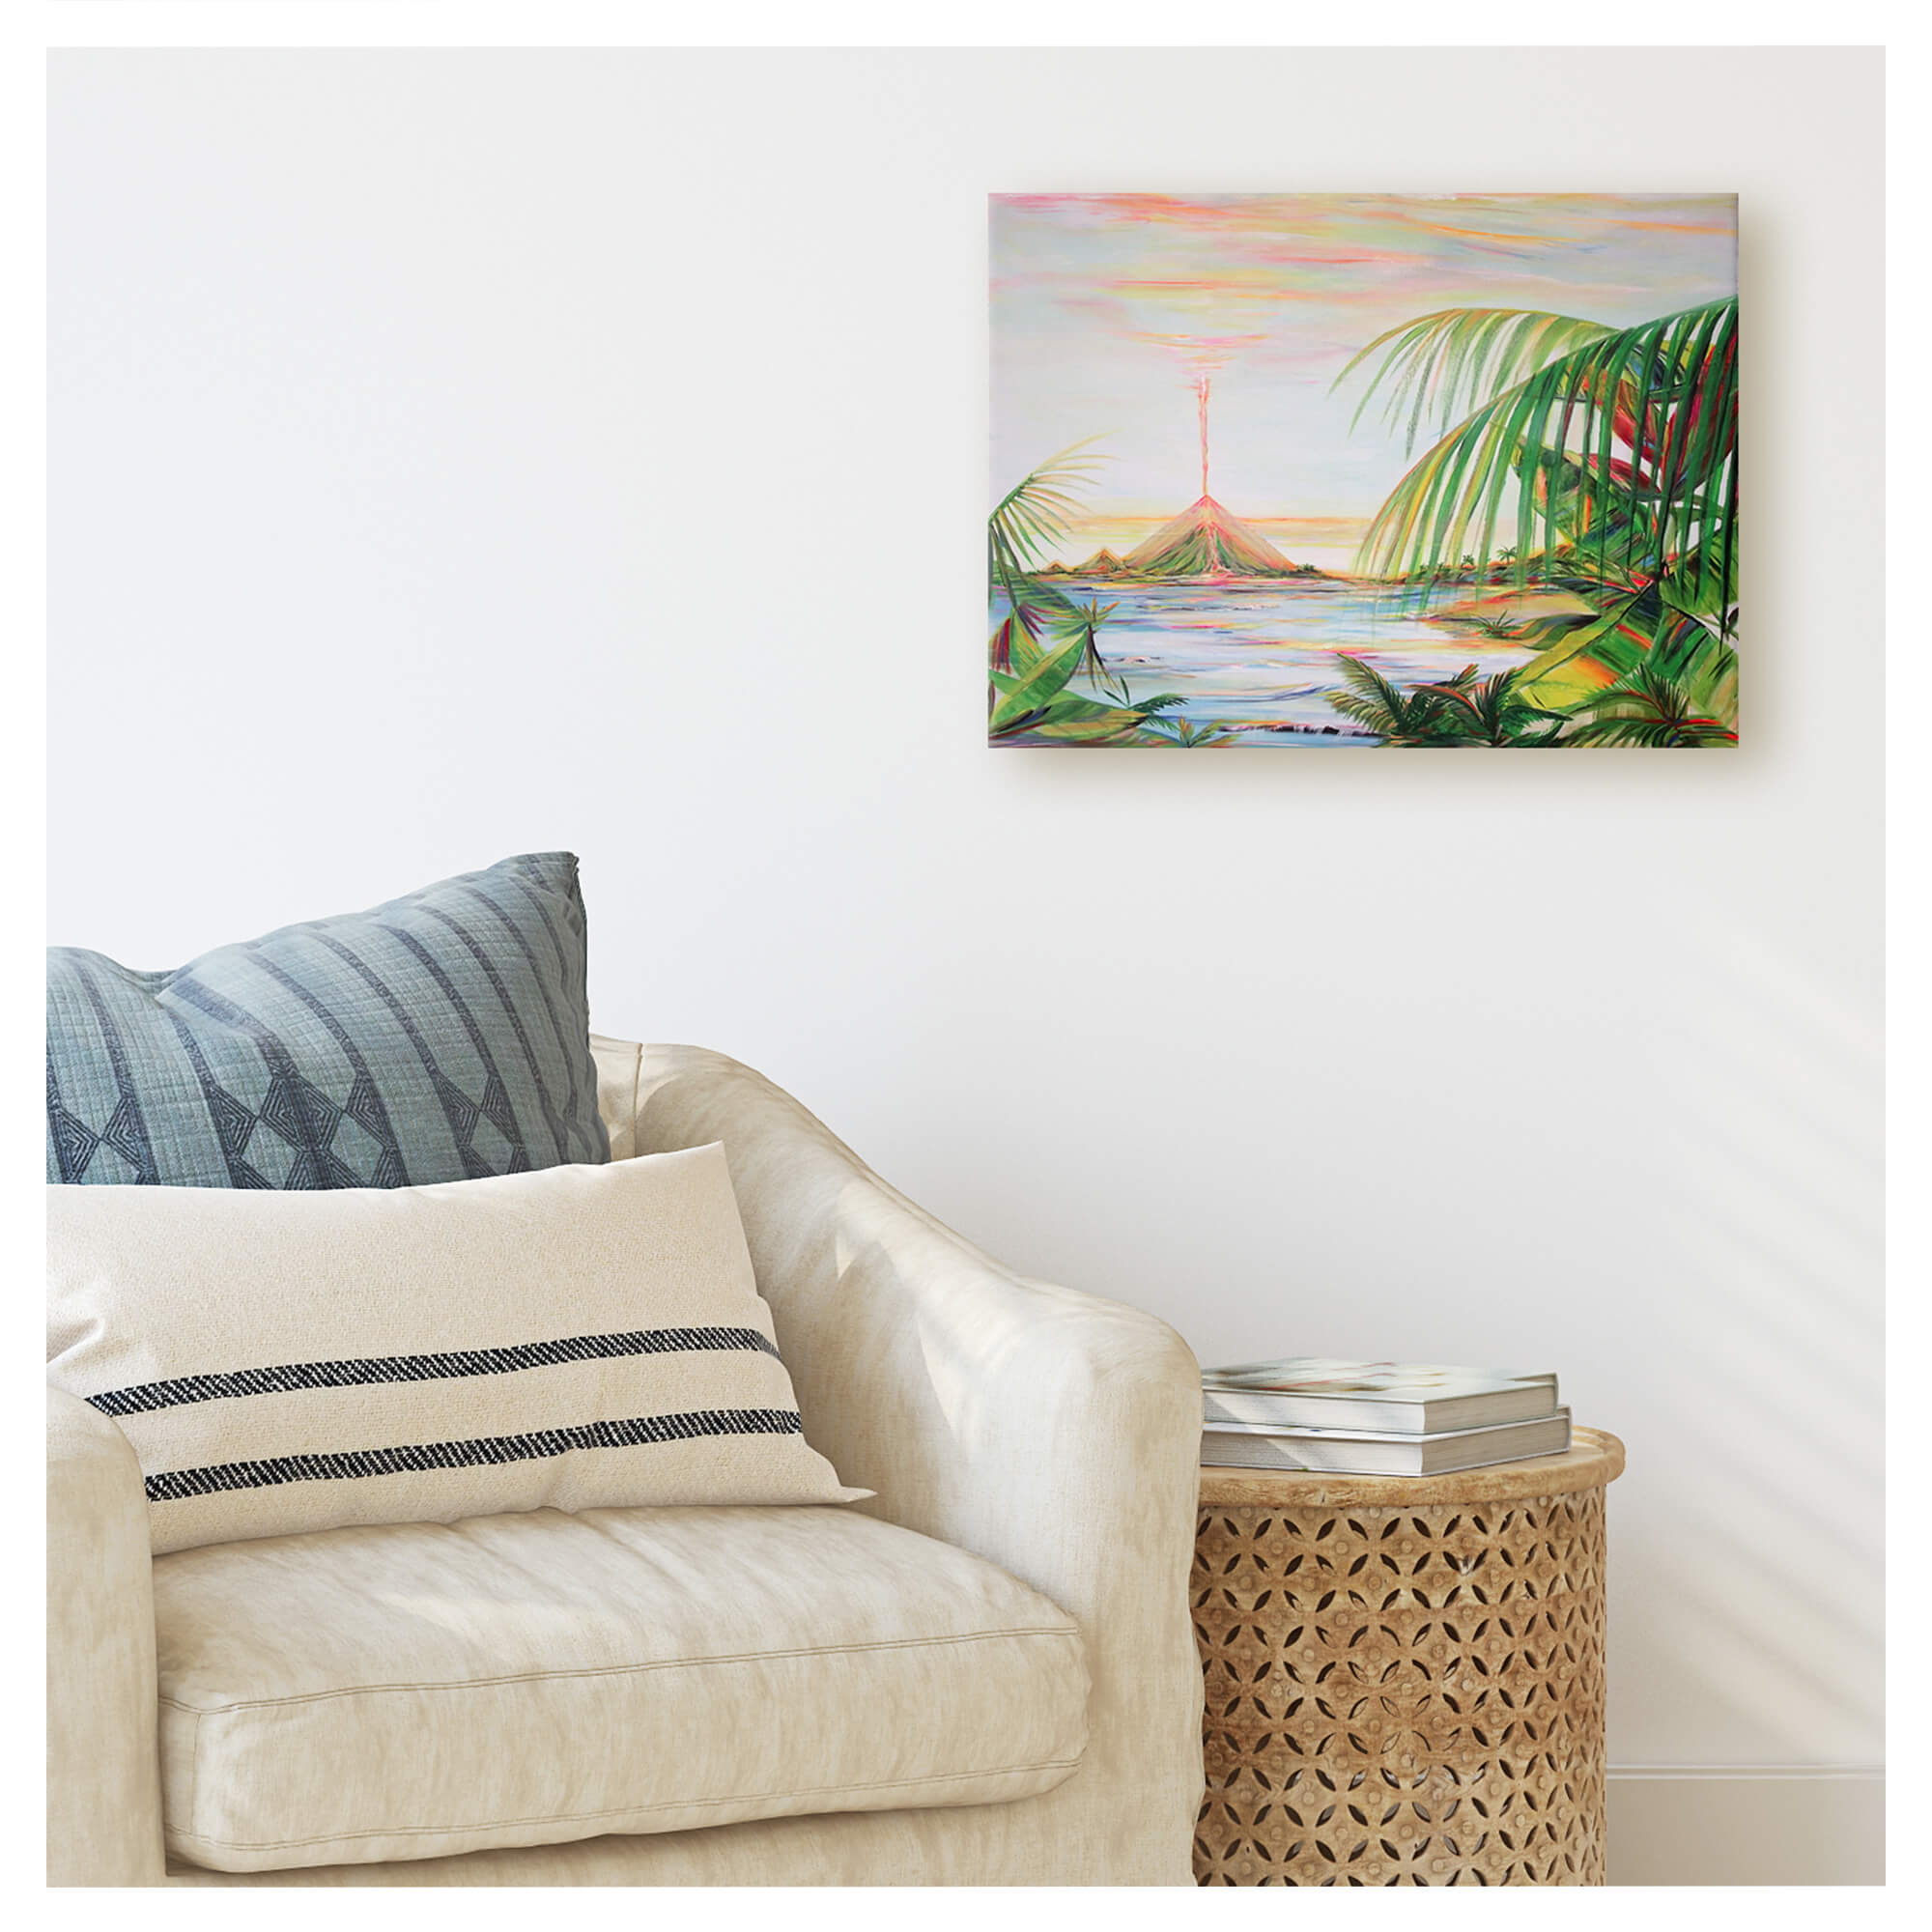 A seascape framed by tropical plants and a distant volcano by Hawaii artist Jess Burda